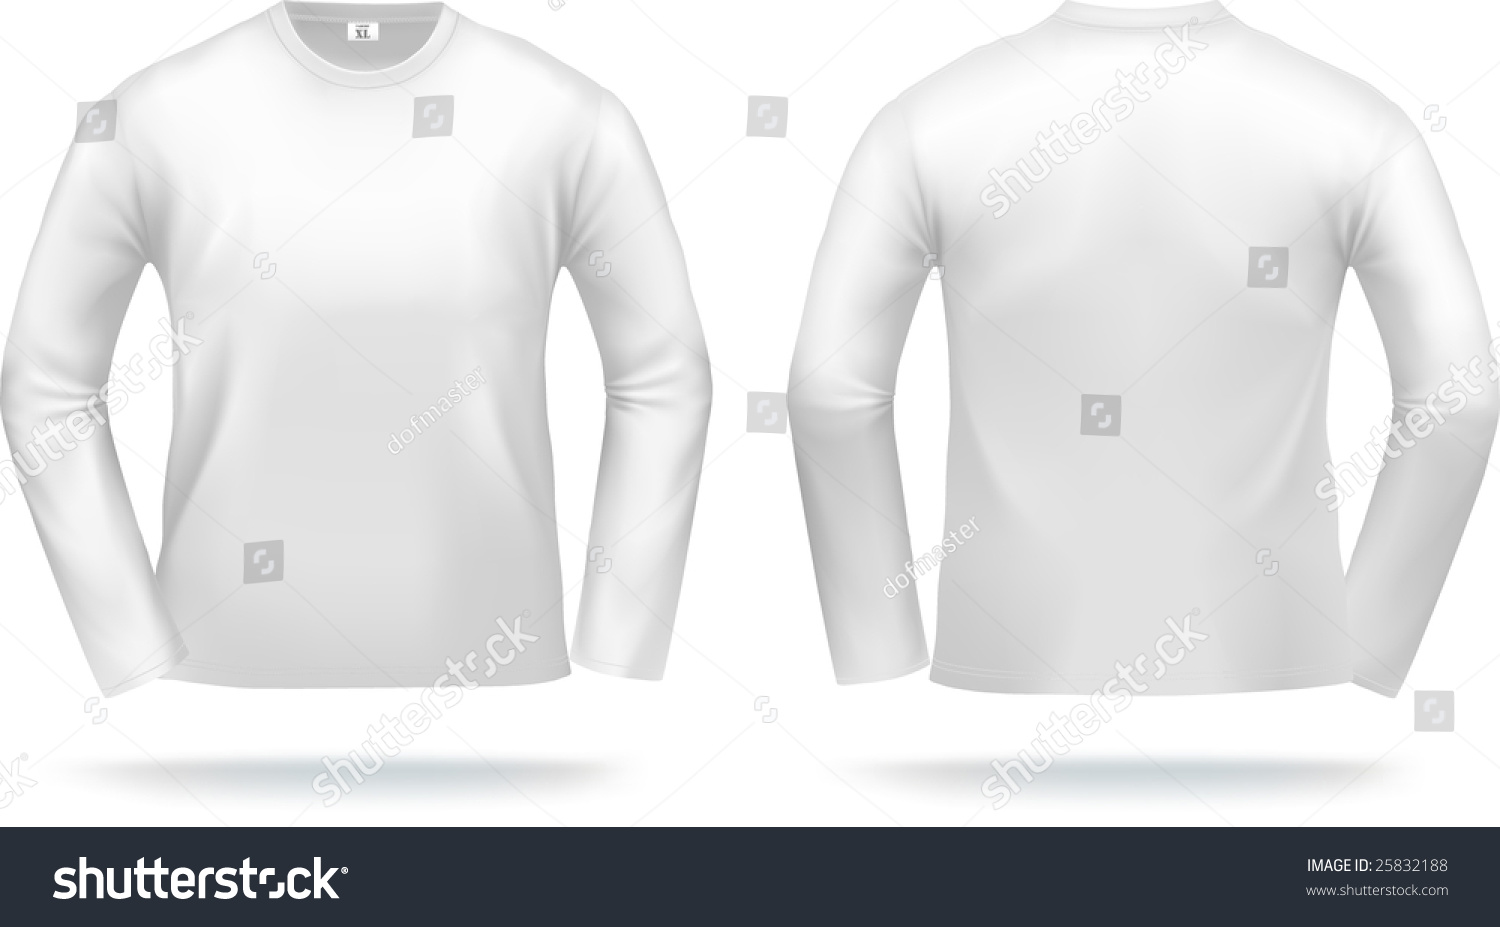 White Long-Sleeved T-Shirt Design Template (Front & Back). Contains ...